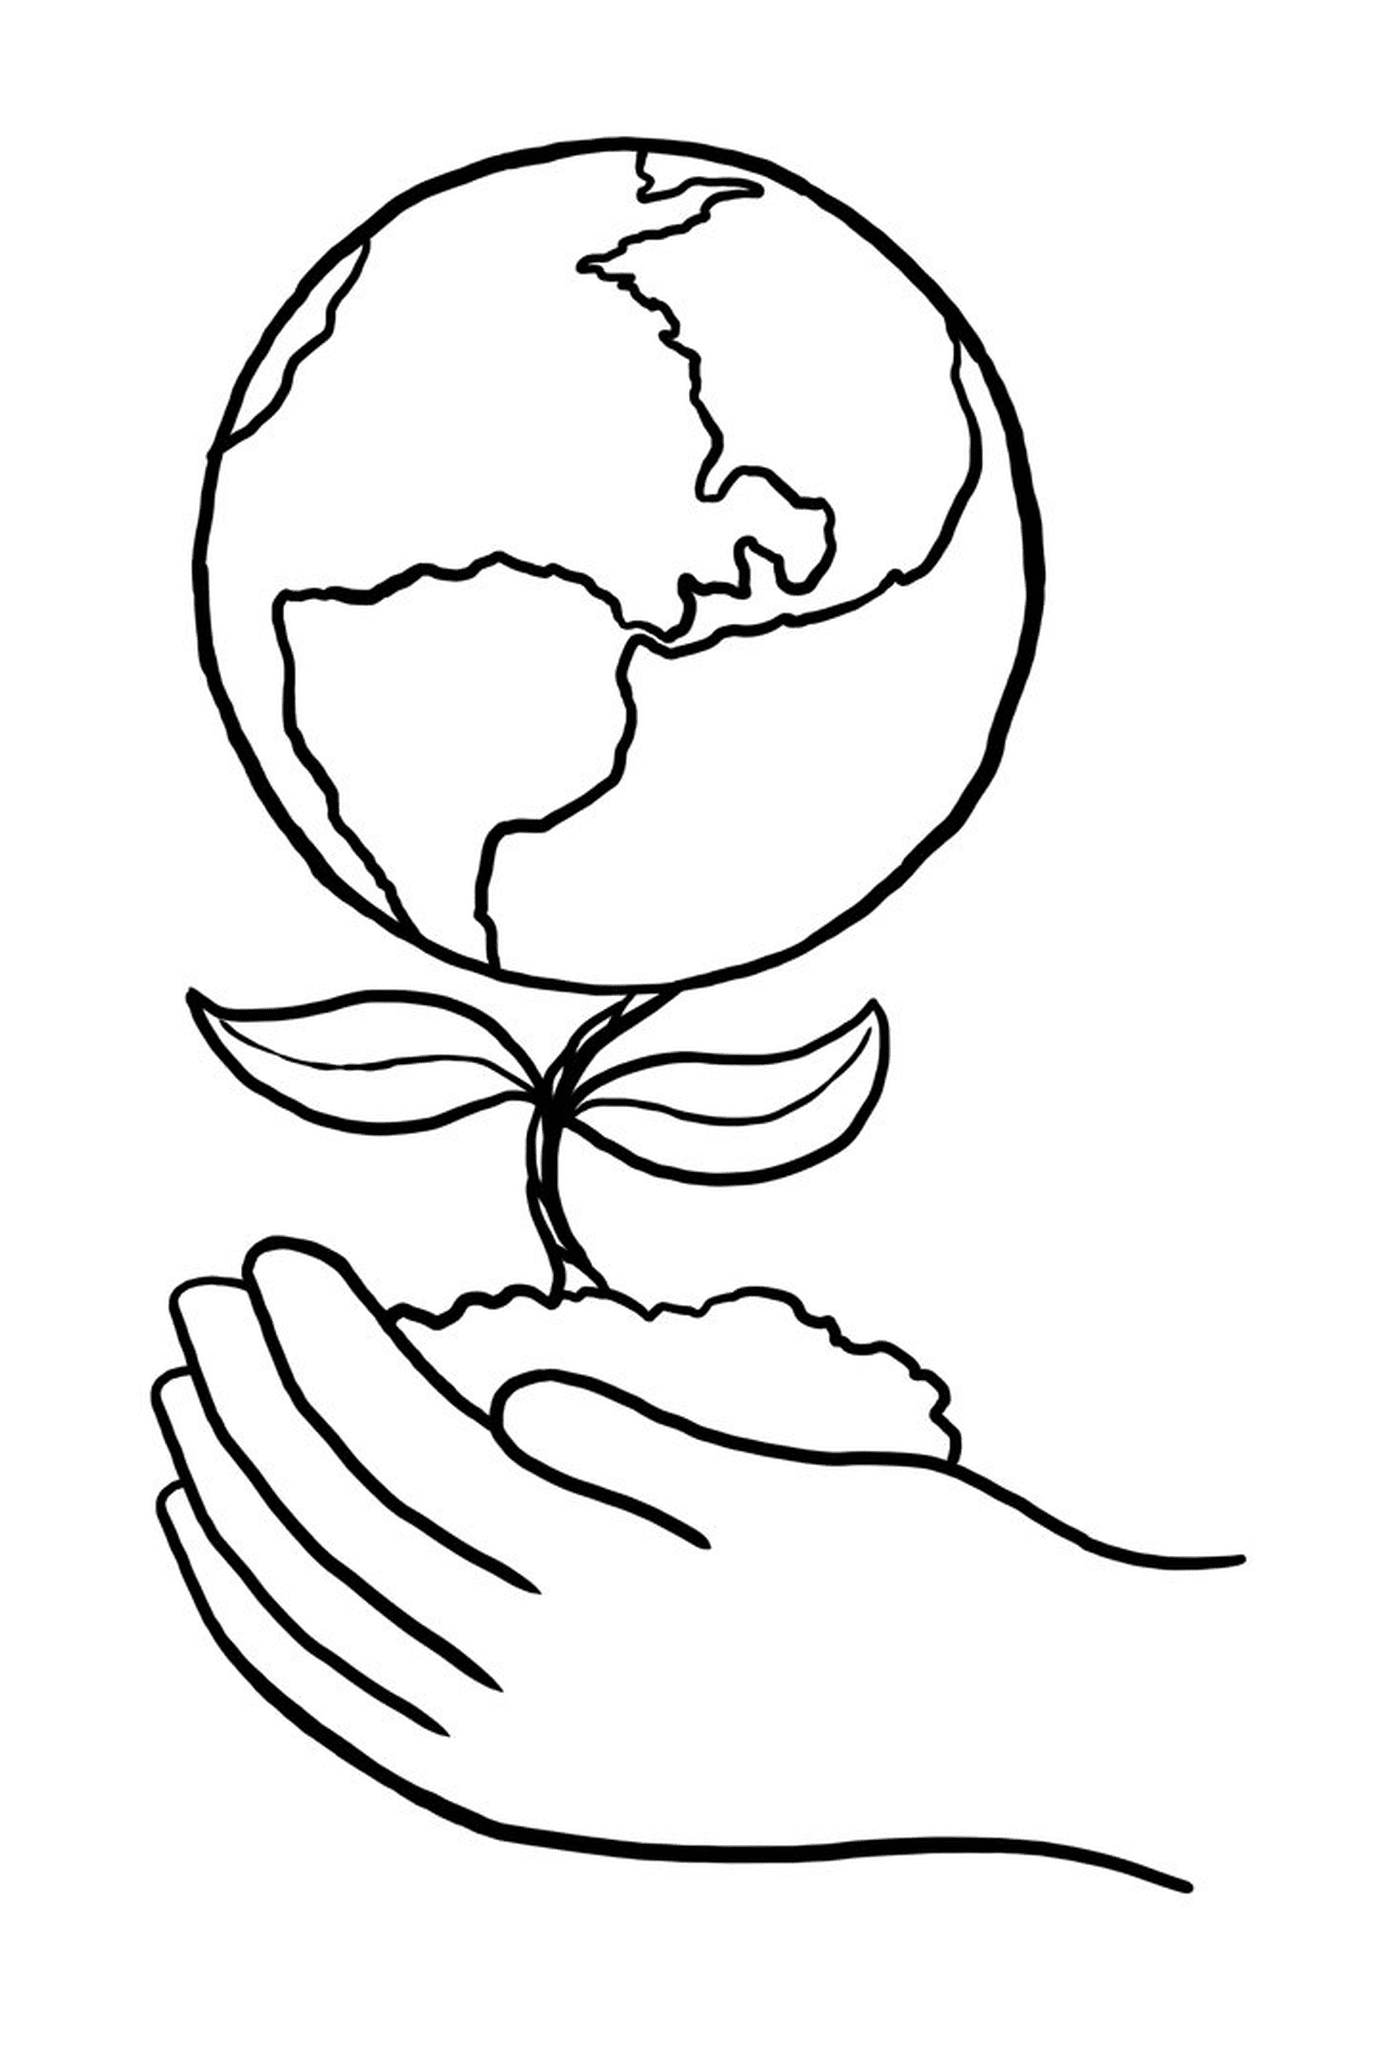  A hand holding a plant in front of a globe 